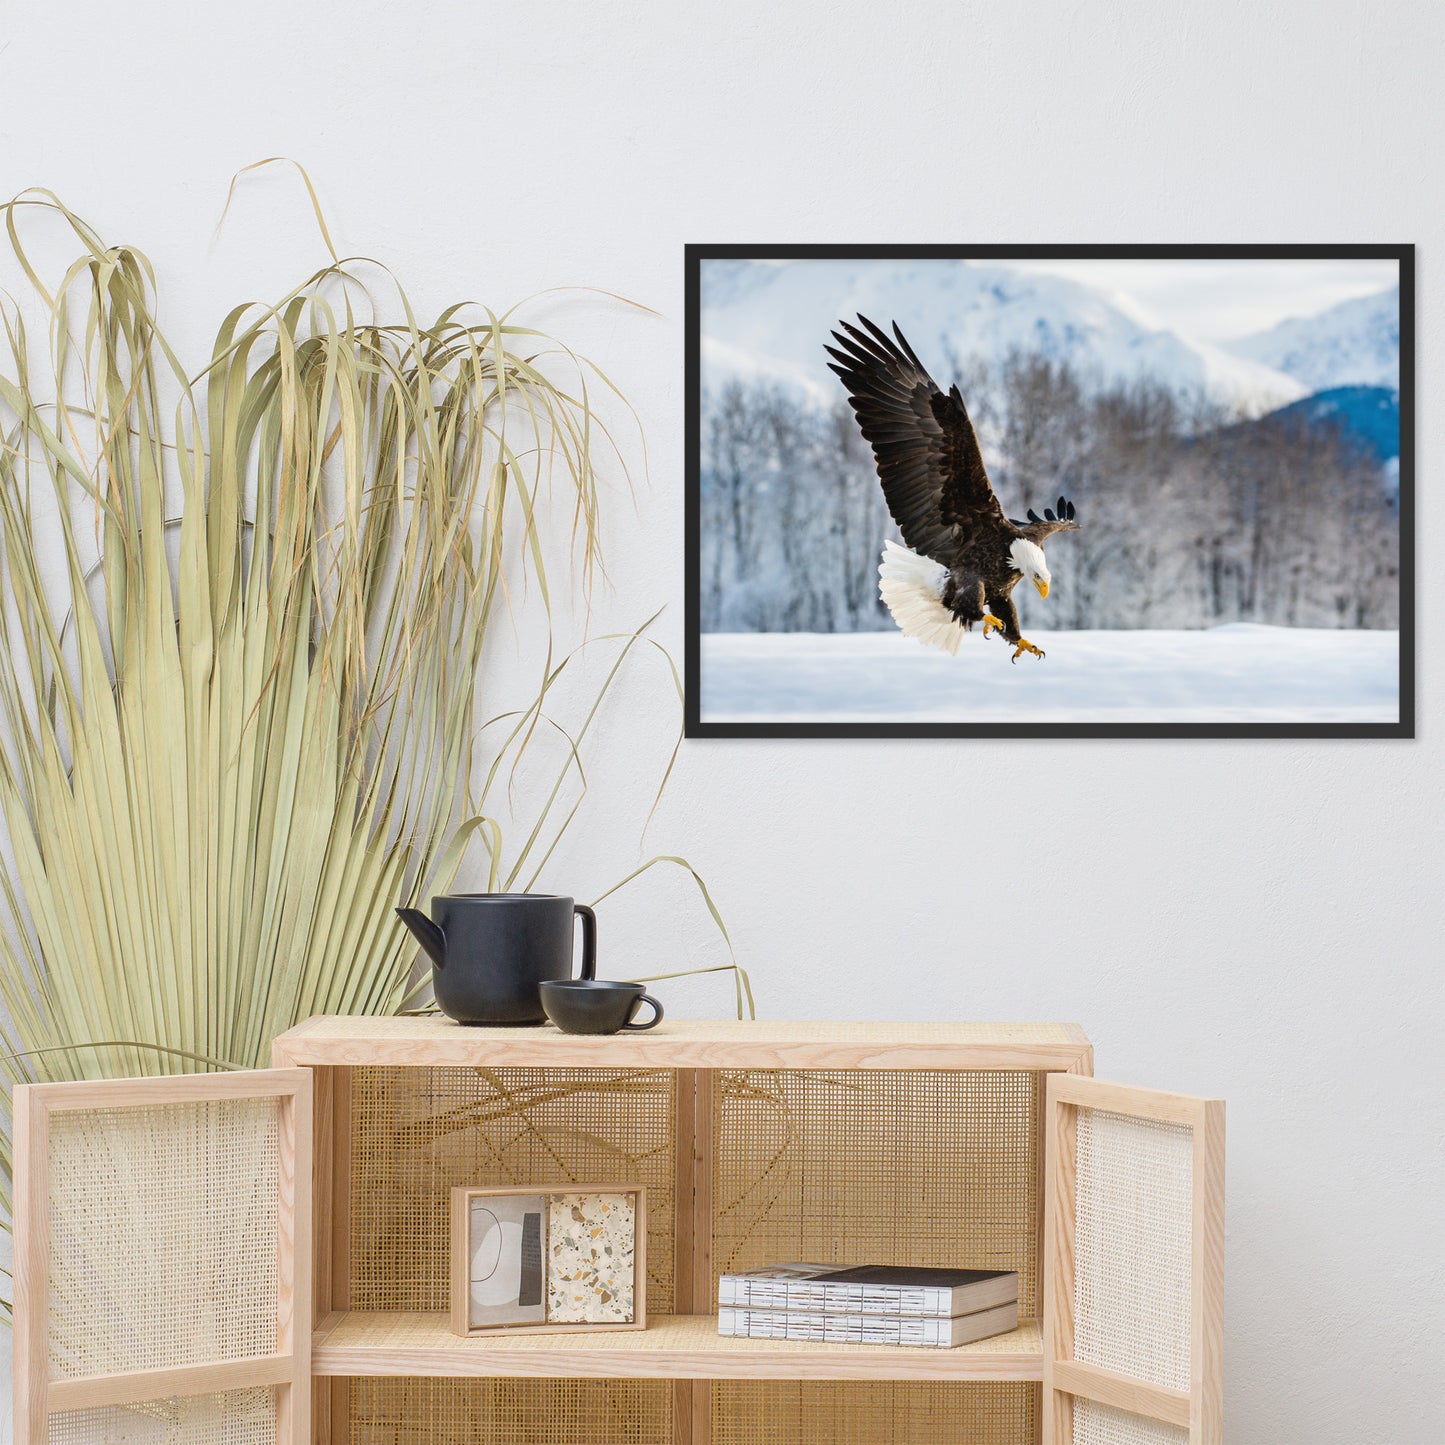 front room wall pictures, Adult Bald Eagle and Alaskan Winter Animal Wildlife Photograph Framed Wall Art Print